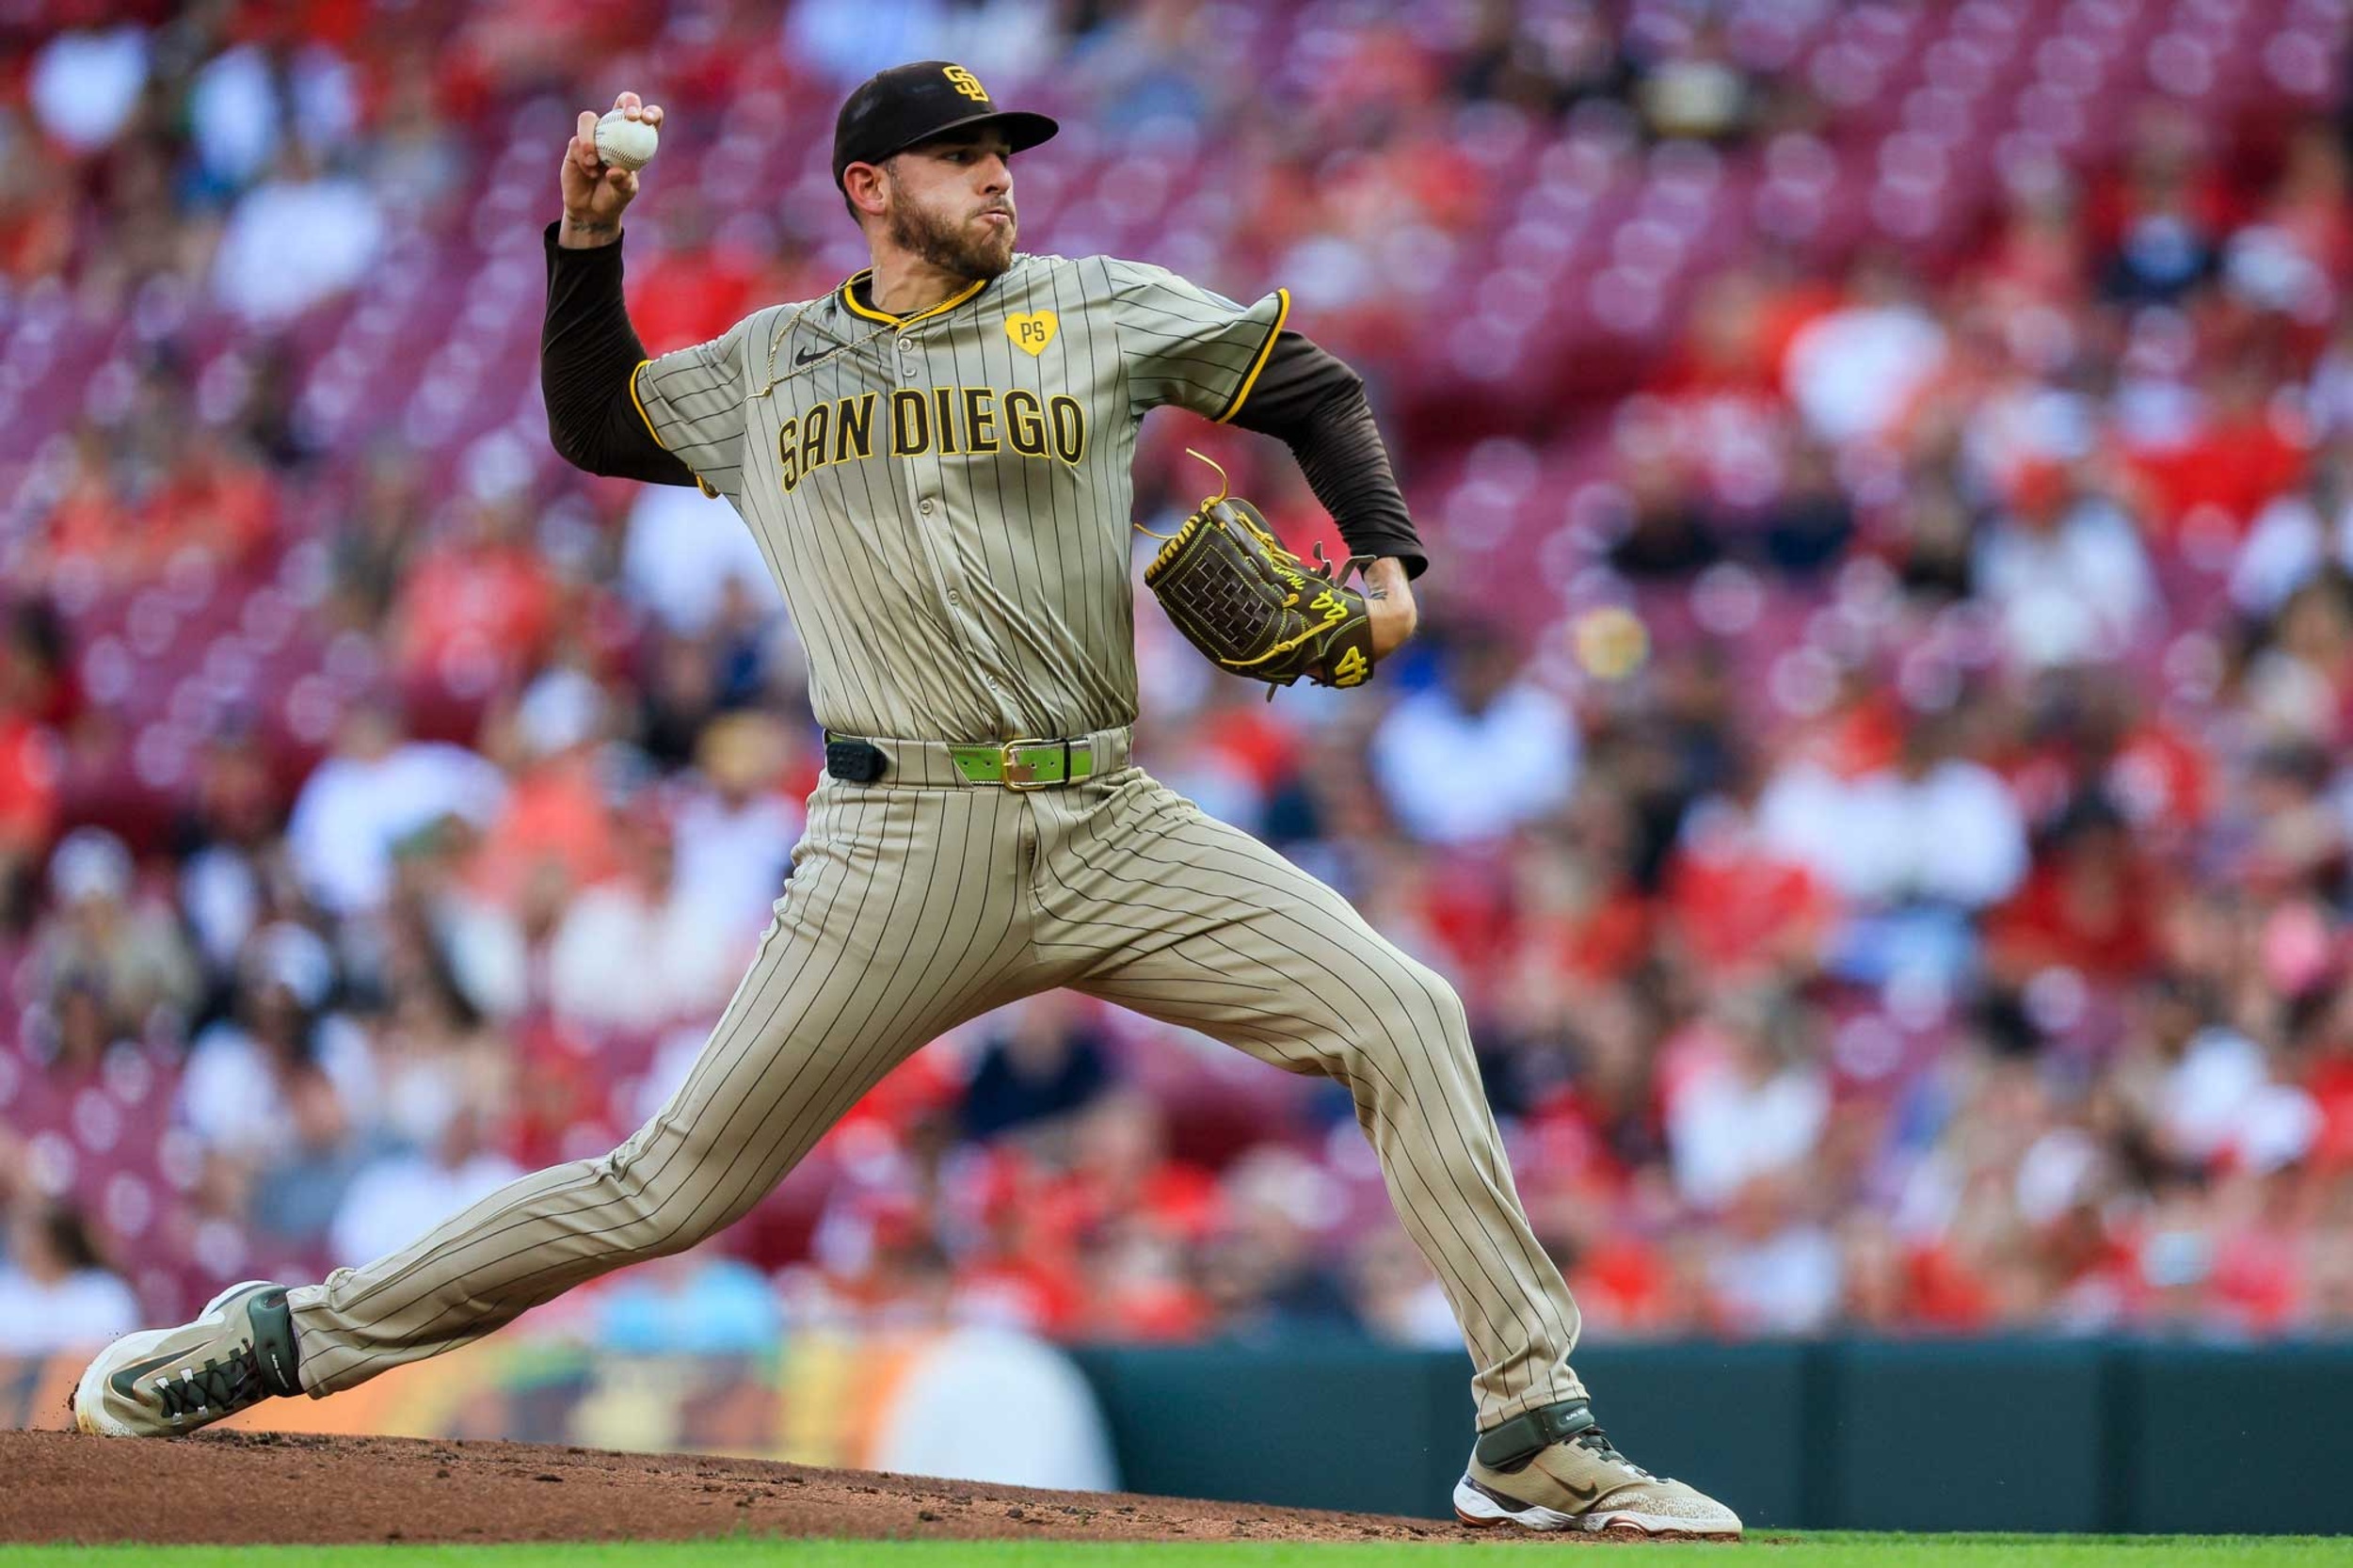 <p>Musgrove's Spring Training struggles carried over into the regular season with a 5.66 ERA over 10 starts. He did show flashes of his old self before going on the IL with an elbow injury that threatened his season.</p><p><a href='https://www.msn.com/en-us/community/channel/vid-cj9pqbr0vn9in2b6ddcd8sfgpfq6x6utp44fssrv6mc2gtybw0us'>Follow us on MSN to see more of our exclusive MLB content.</a></p>